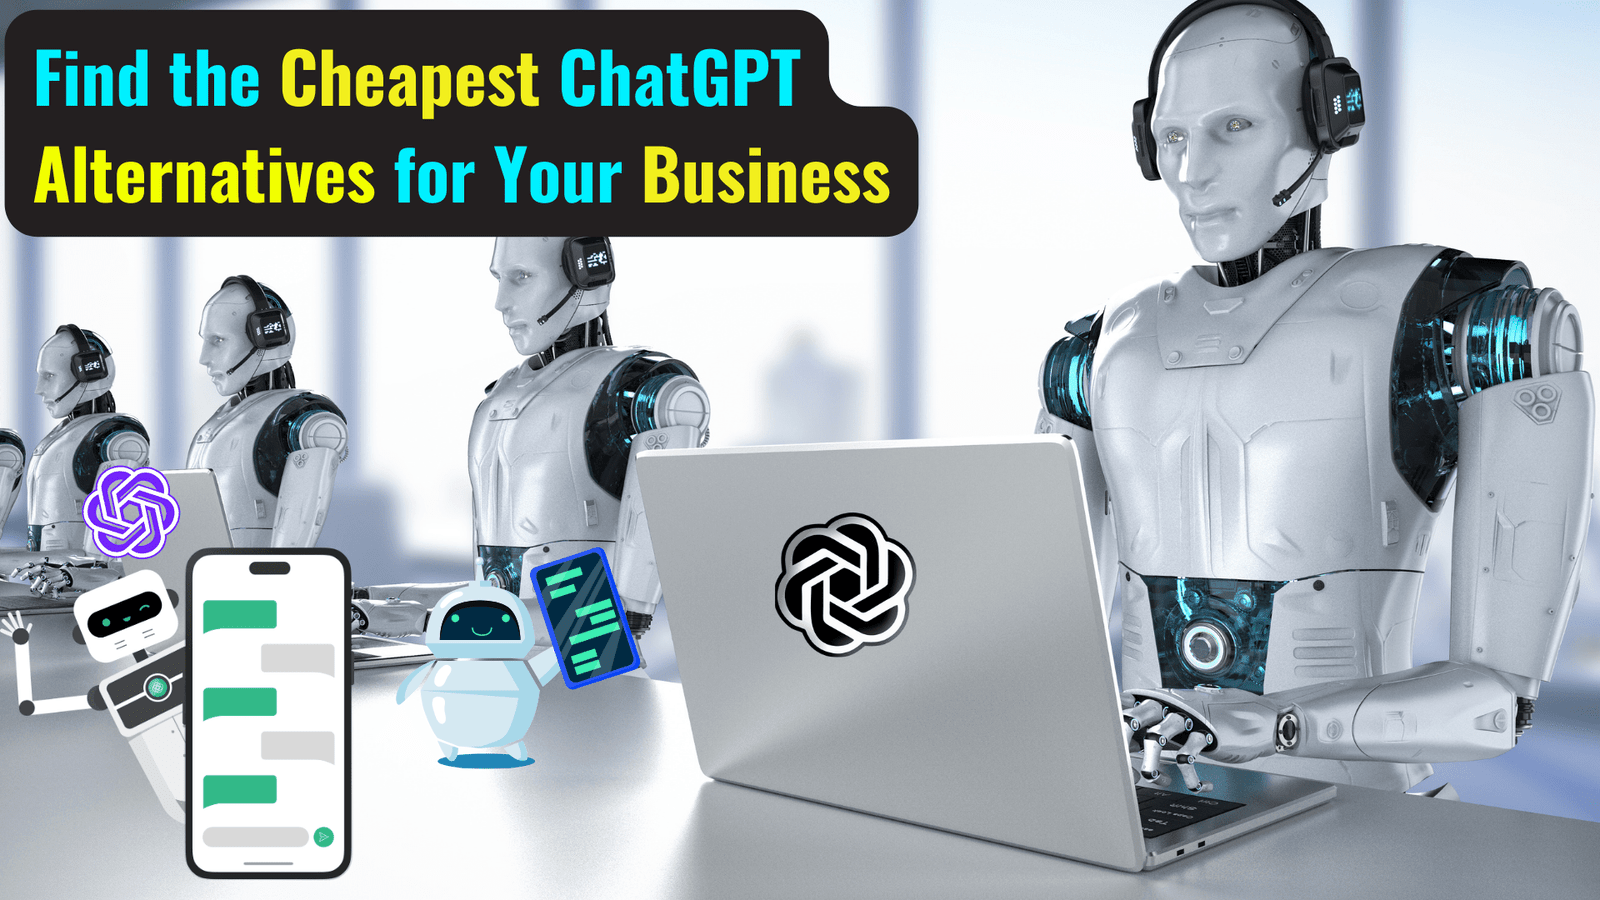 Find the Cheapest ChatGPT Alternatives for Your Business